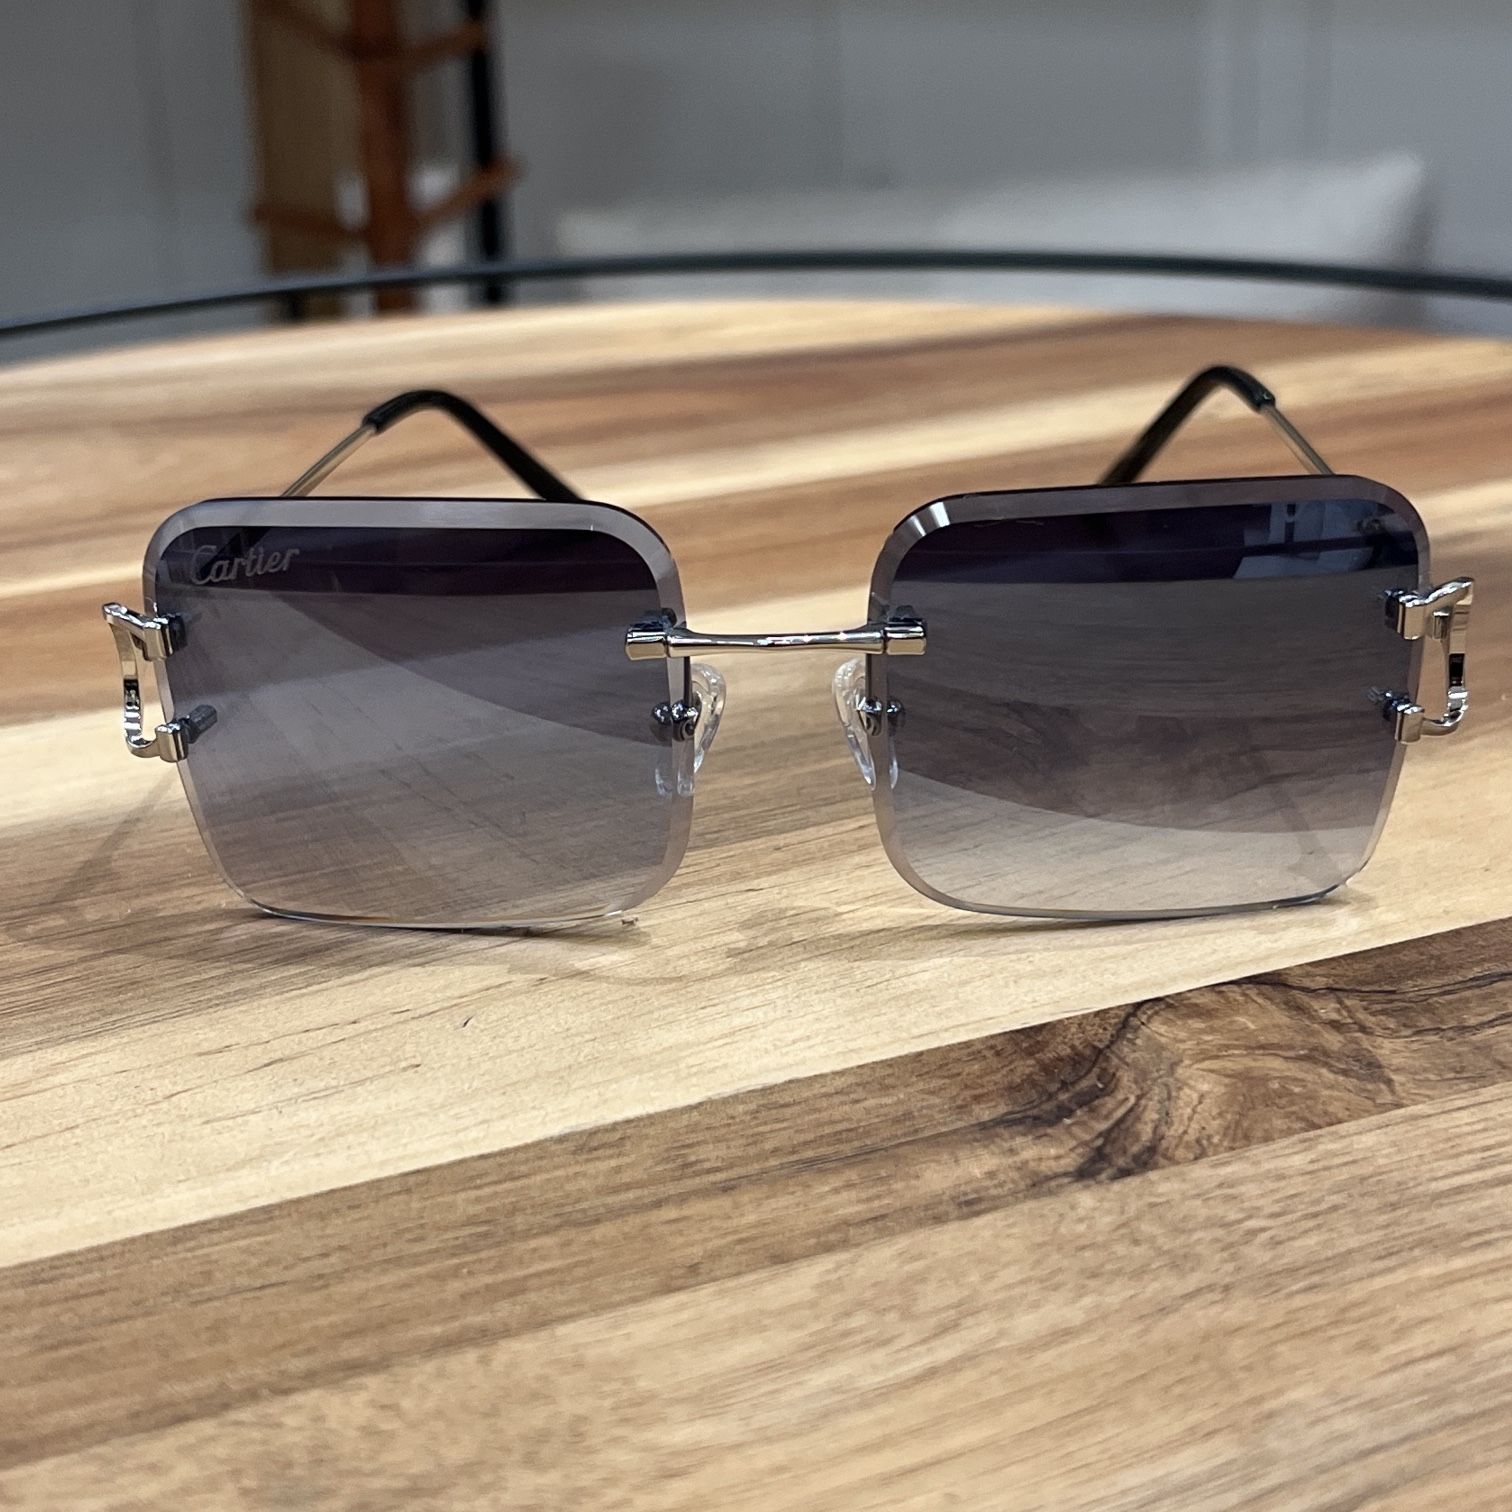 Cartier Heart Sale Brown Gradient Sunglasses for Sale in Baltimore, MD -  OfferUp